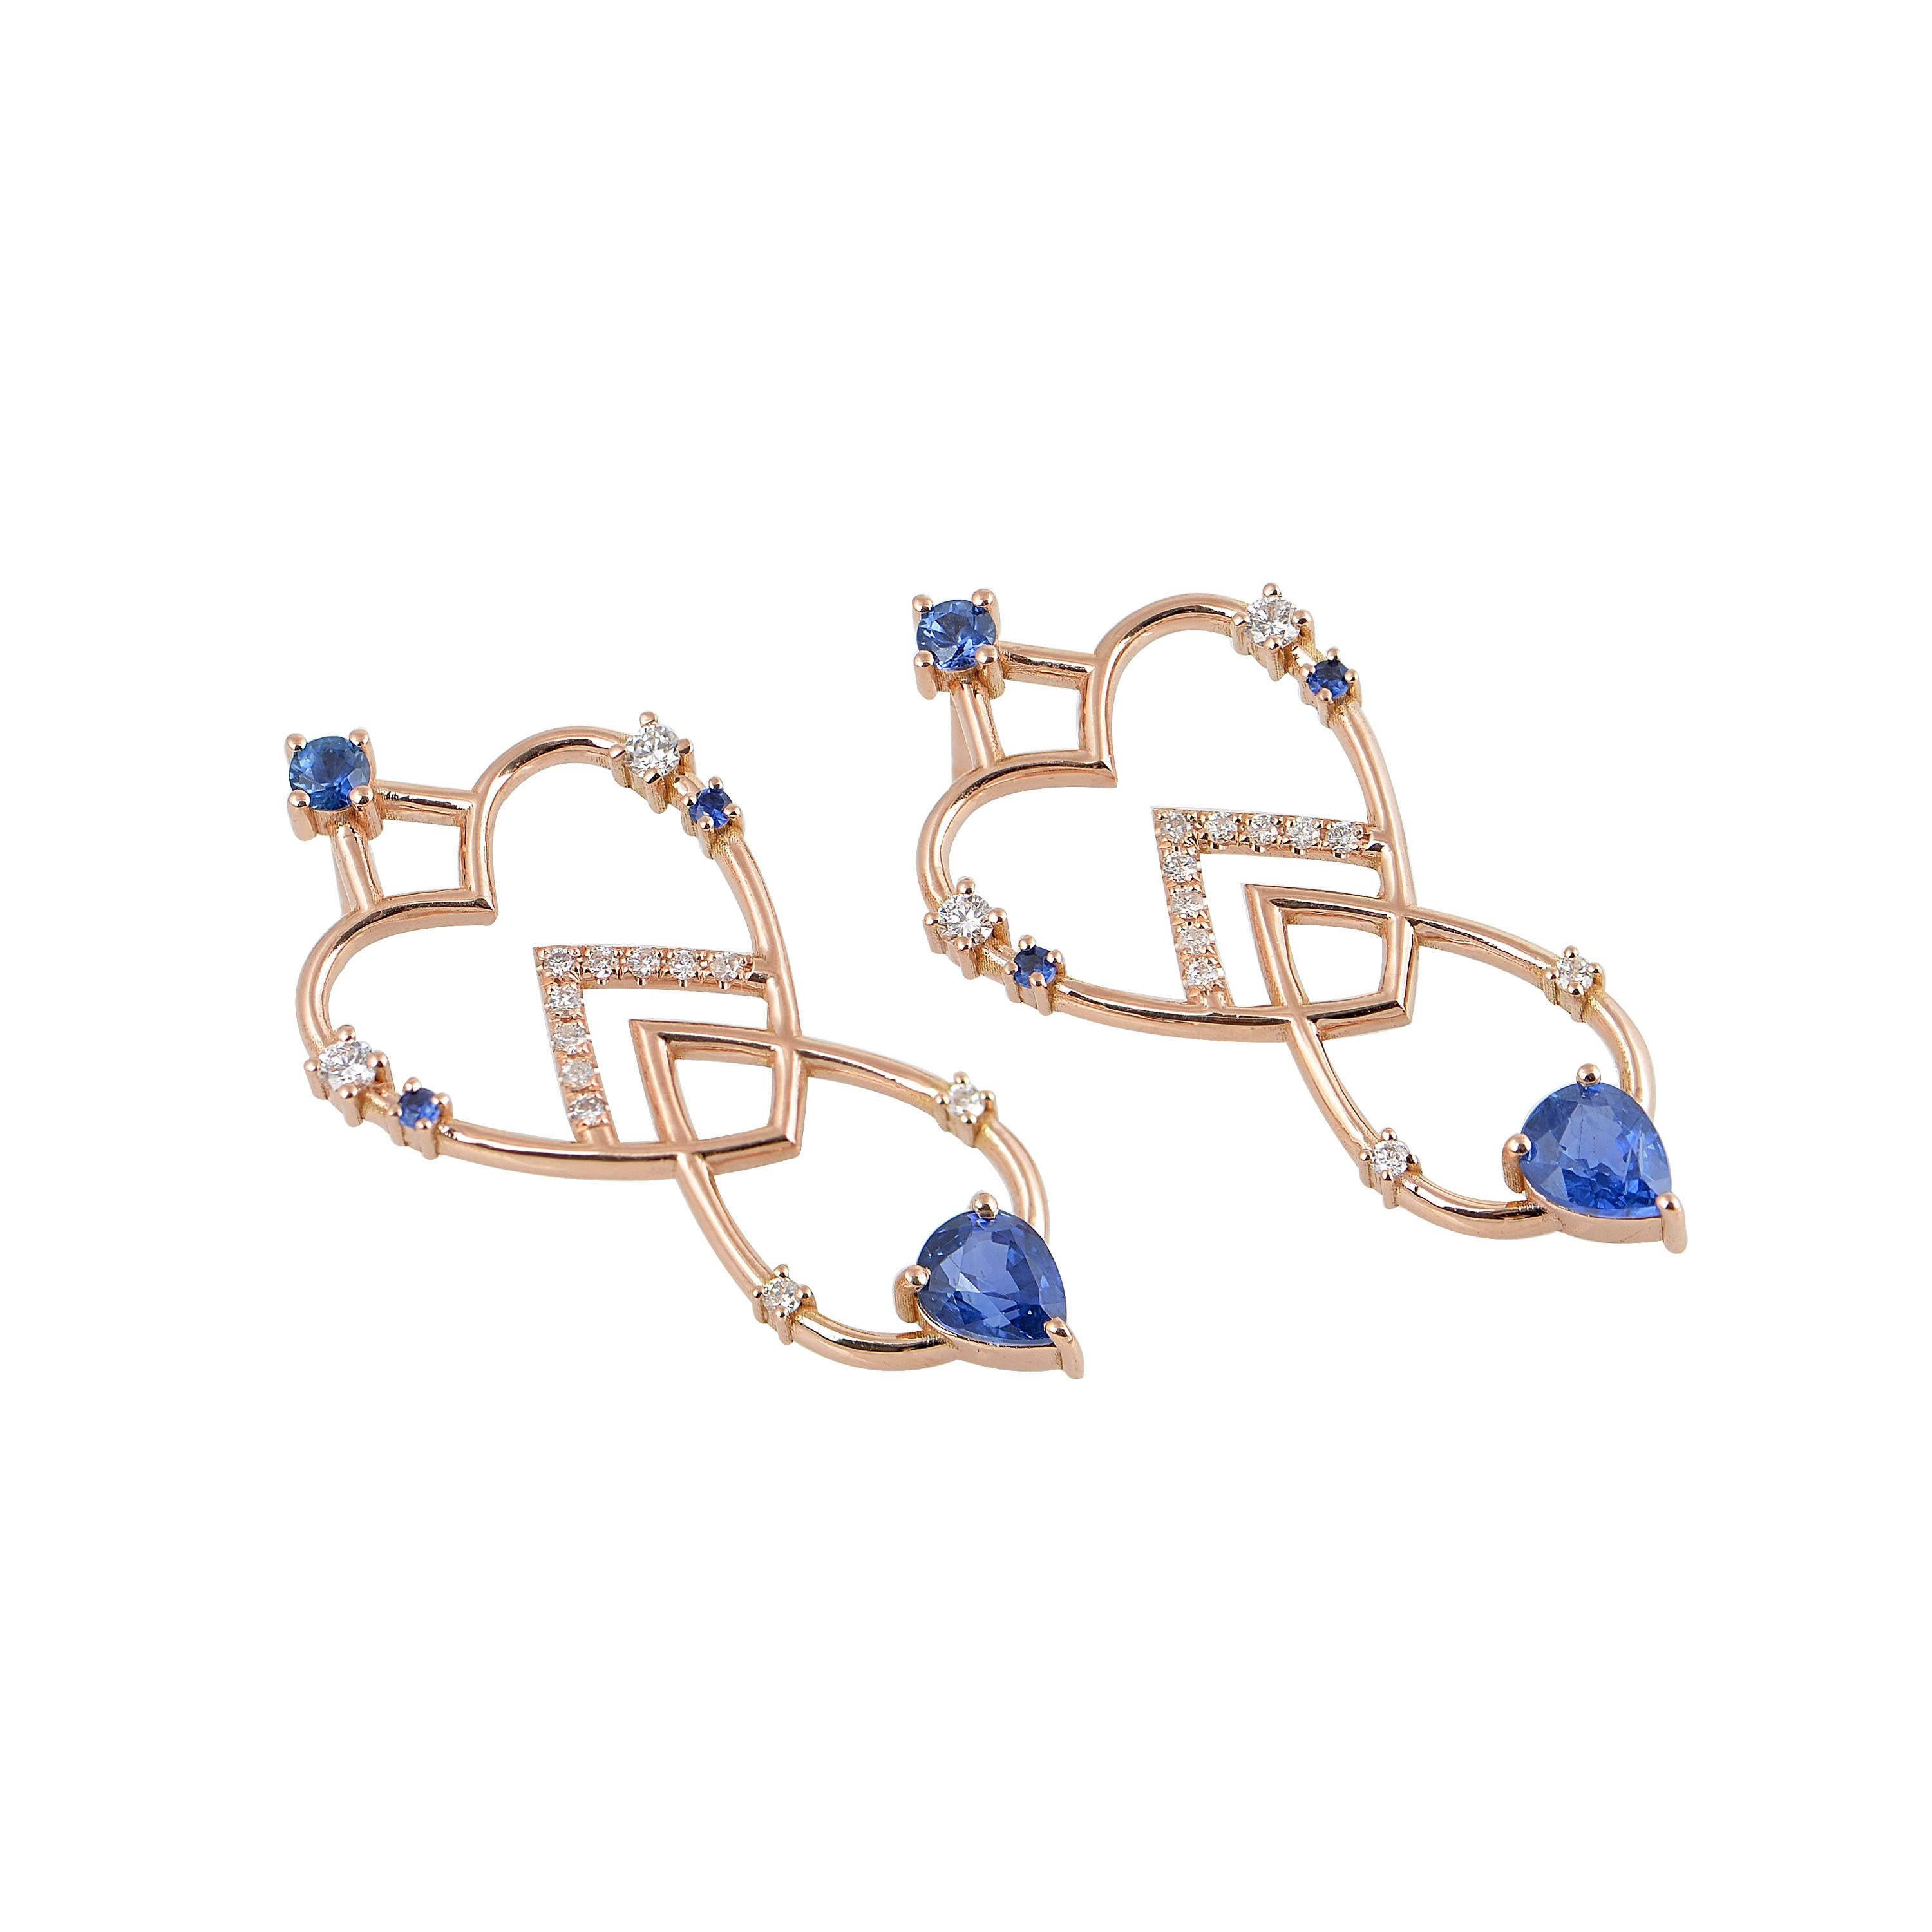 Designer: Alexia Gryllaki
Dimensions: L34x16mm
Weight: approximately 5.9g (pair)
Barcode: ING005E

The Interlocking Geometry earrings in 18 karat rose gold with sapphires approx. 1.21cts and round brilliant-cut diamonds approx. 0.24cts.

About the